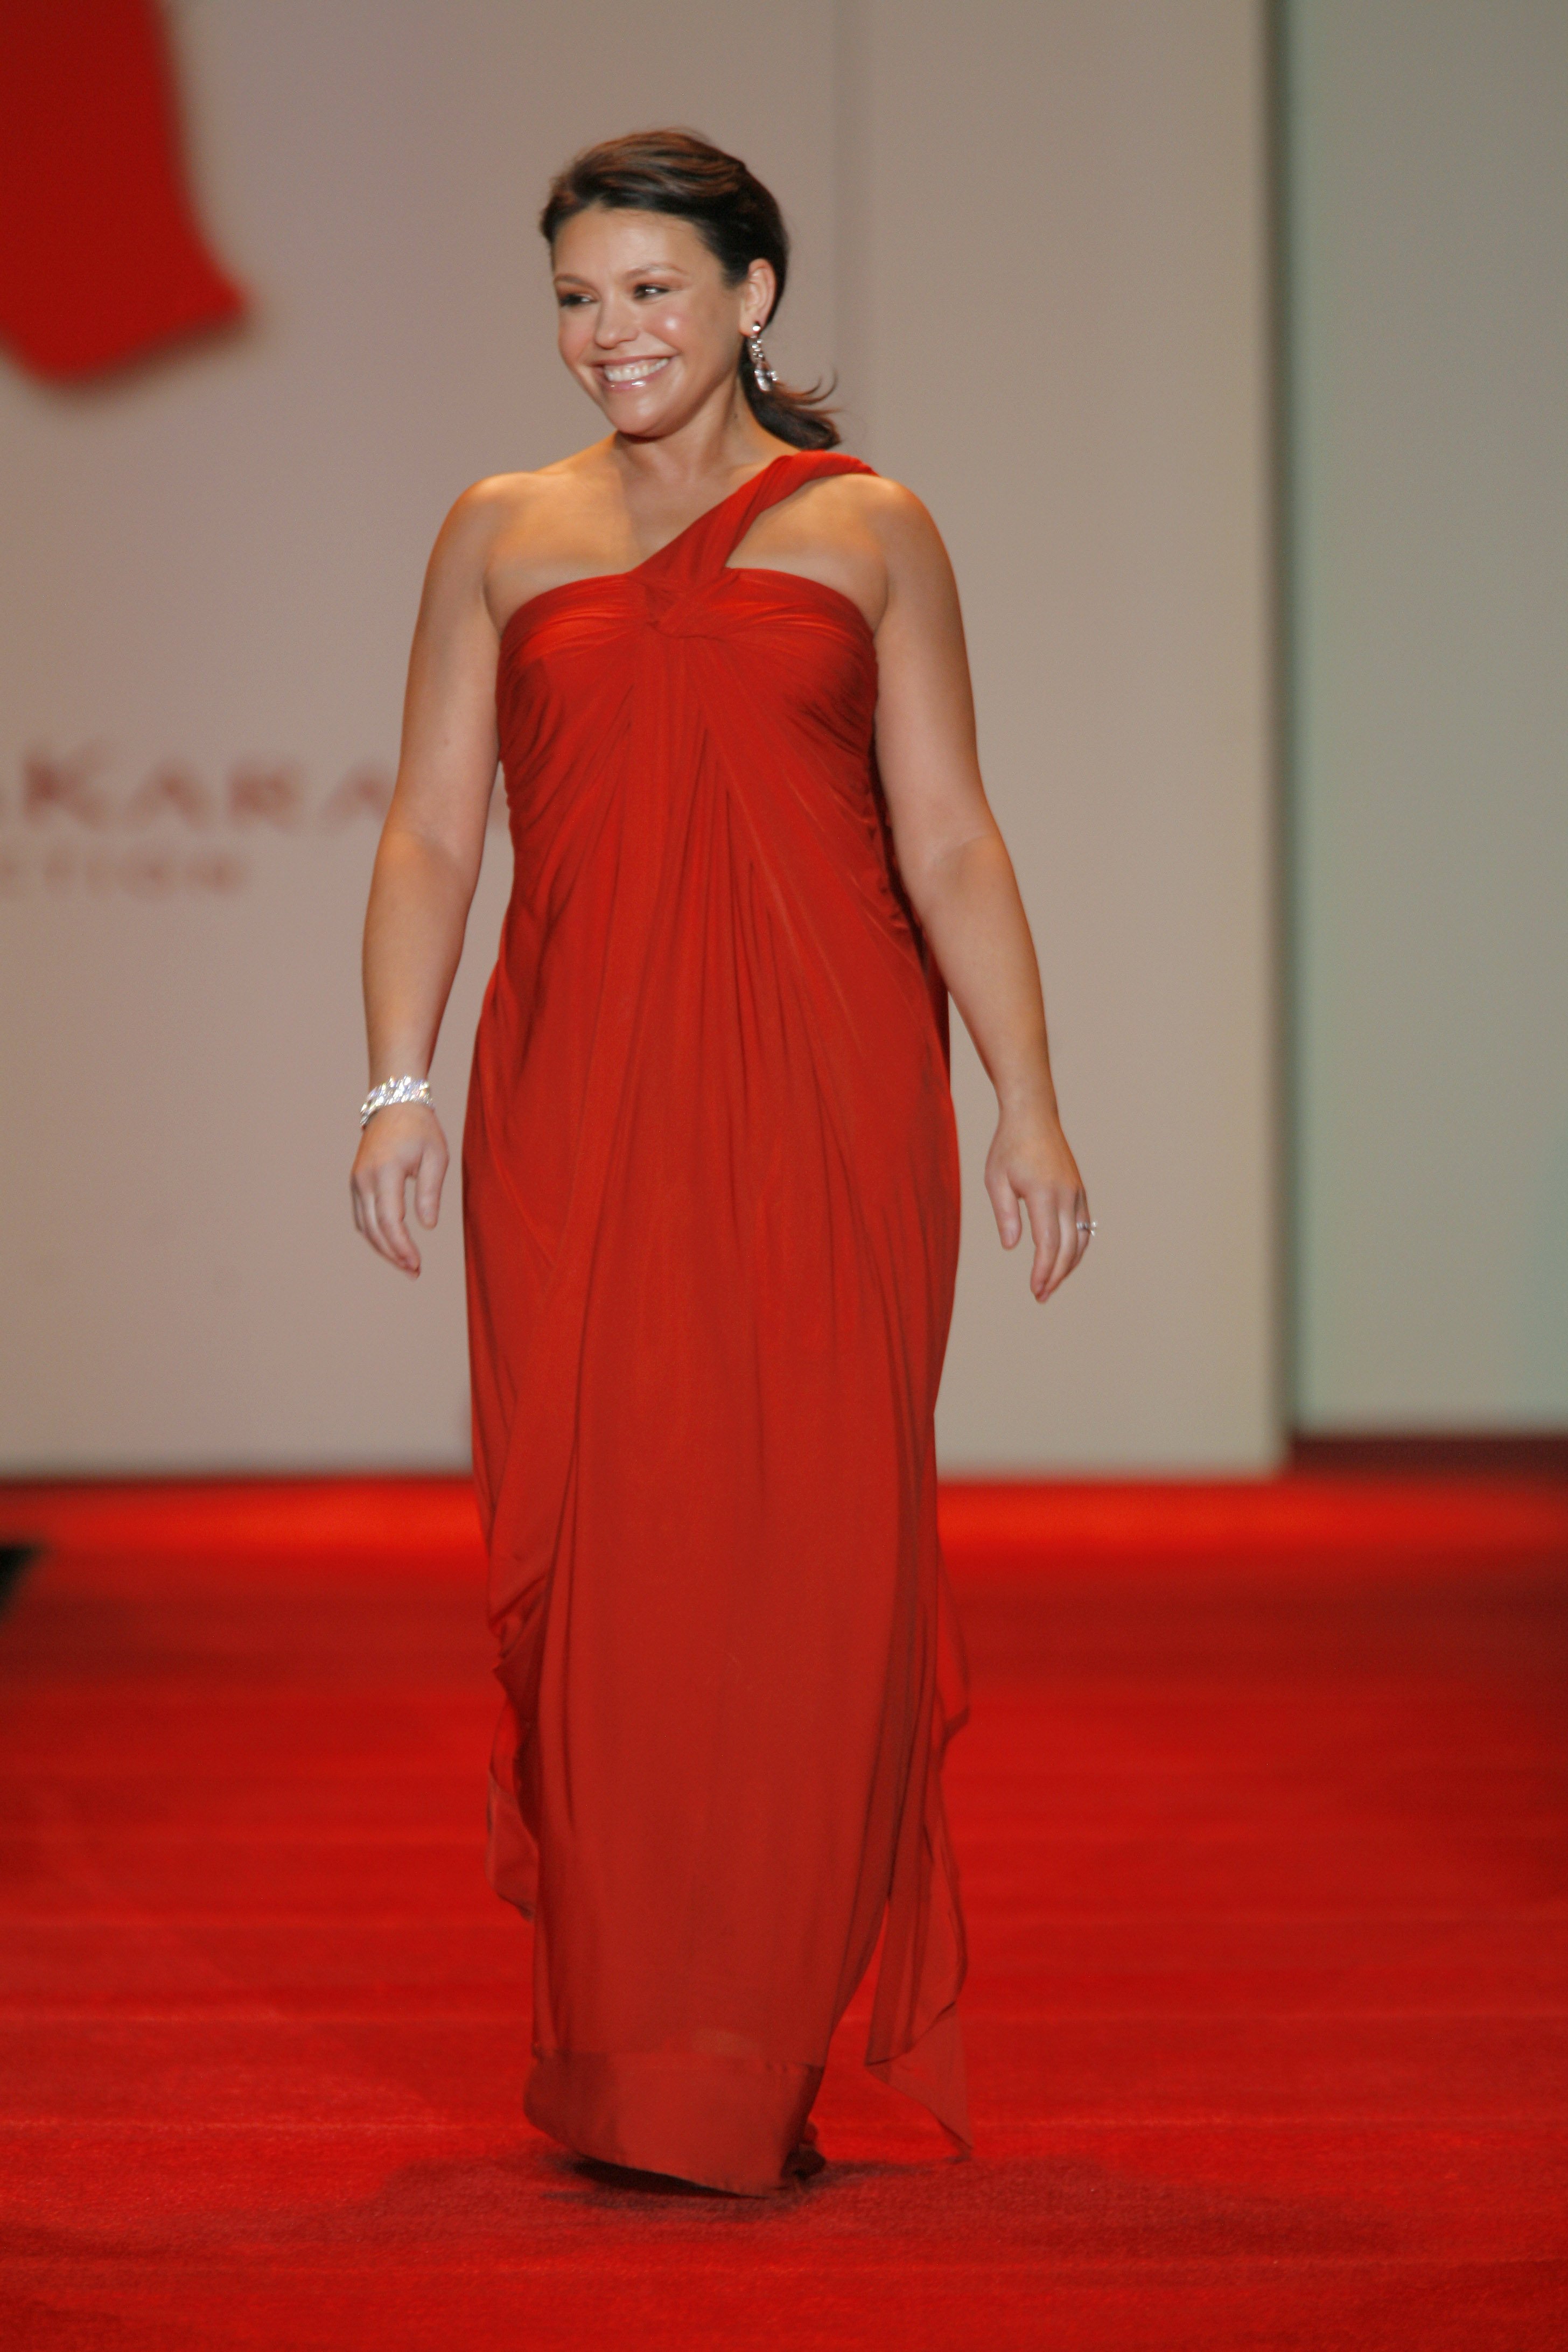 Rachael Ray dressed in Donna Karan during the Heart Truth Red Dress Fall fashion show at The Tent in Bryant Park, New York City. | Source: Getty Images